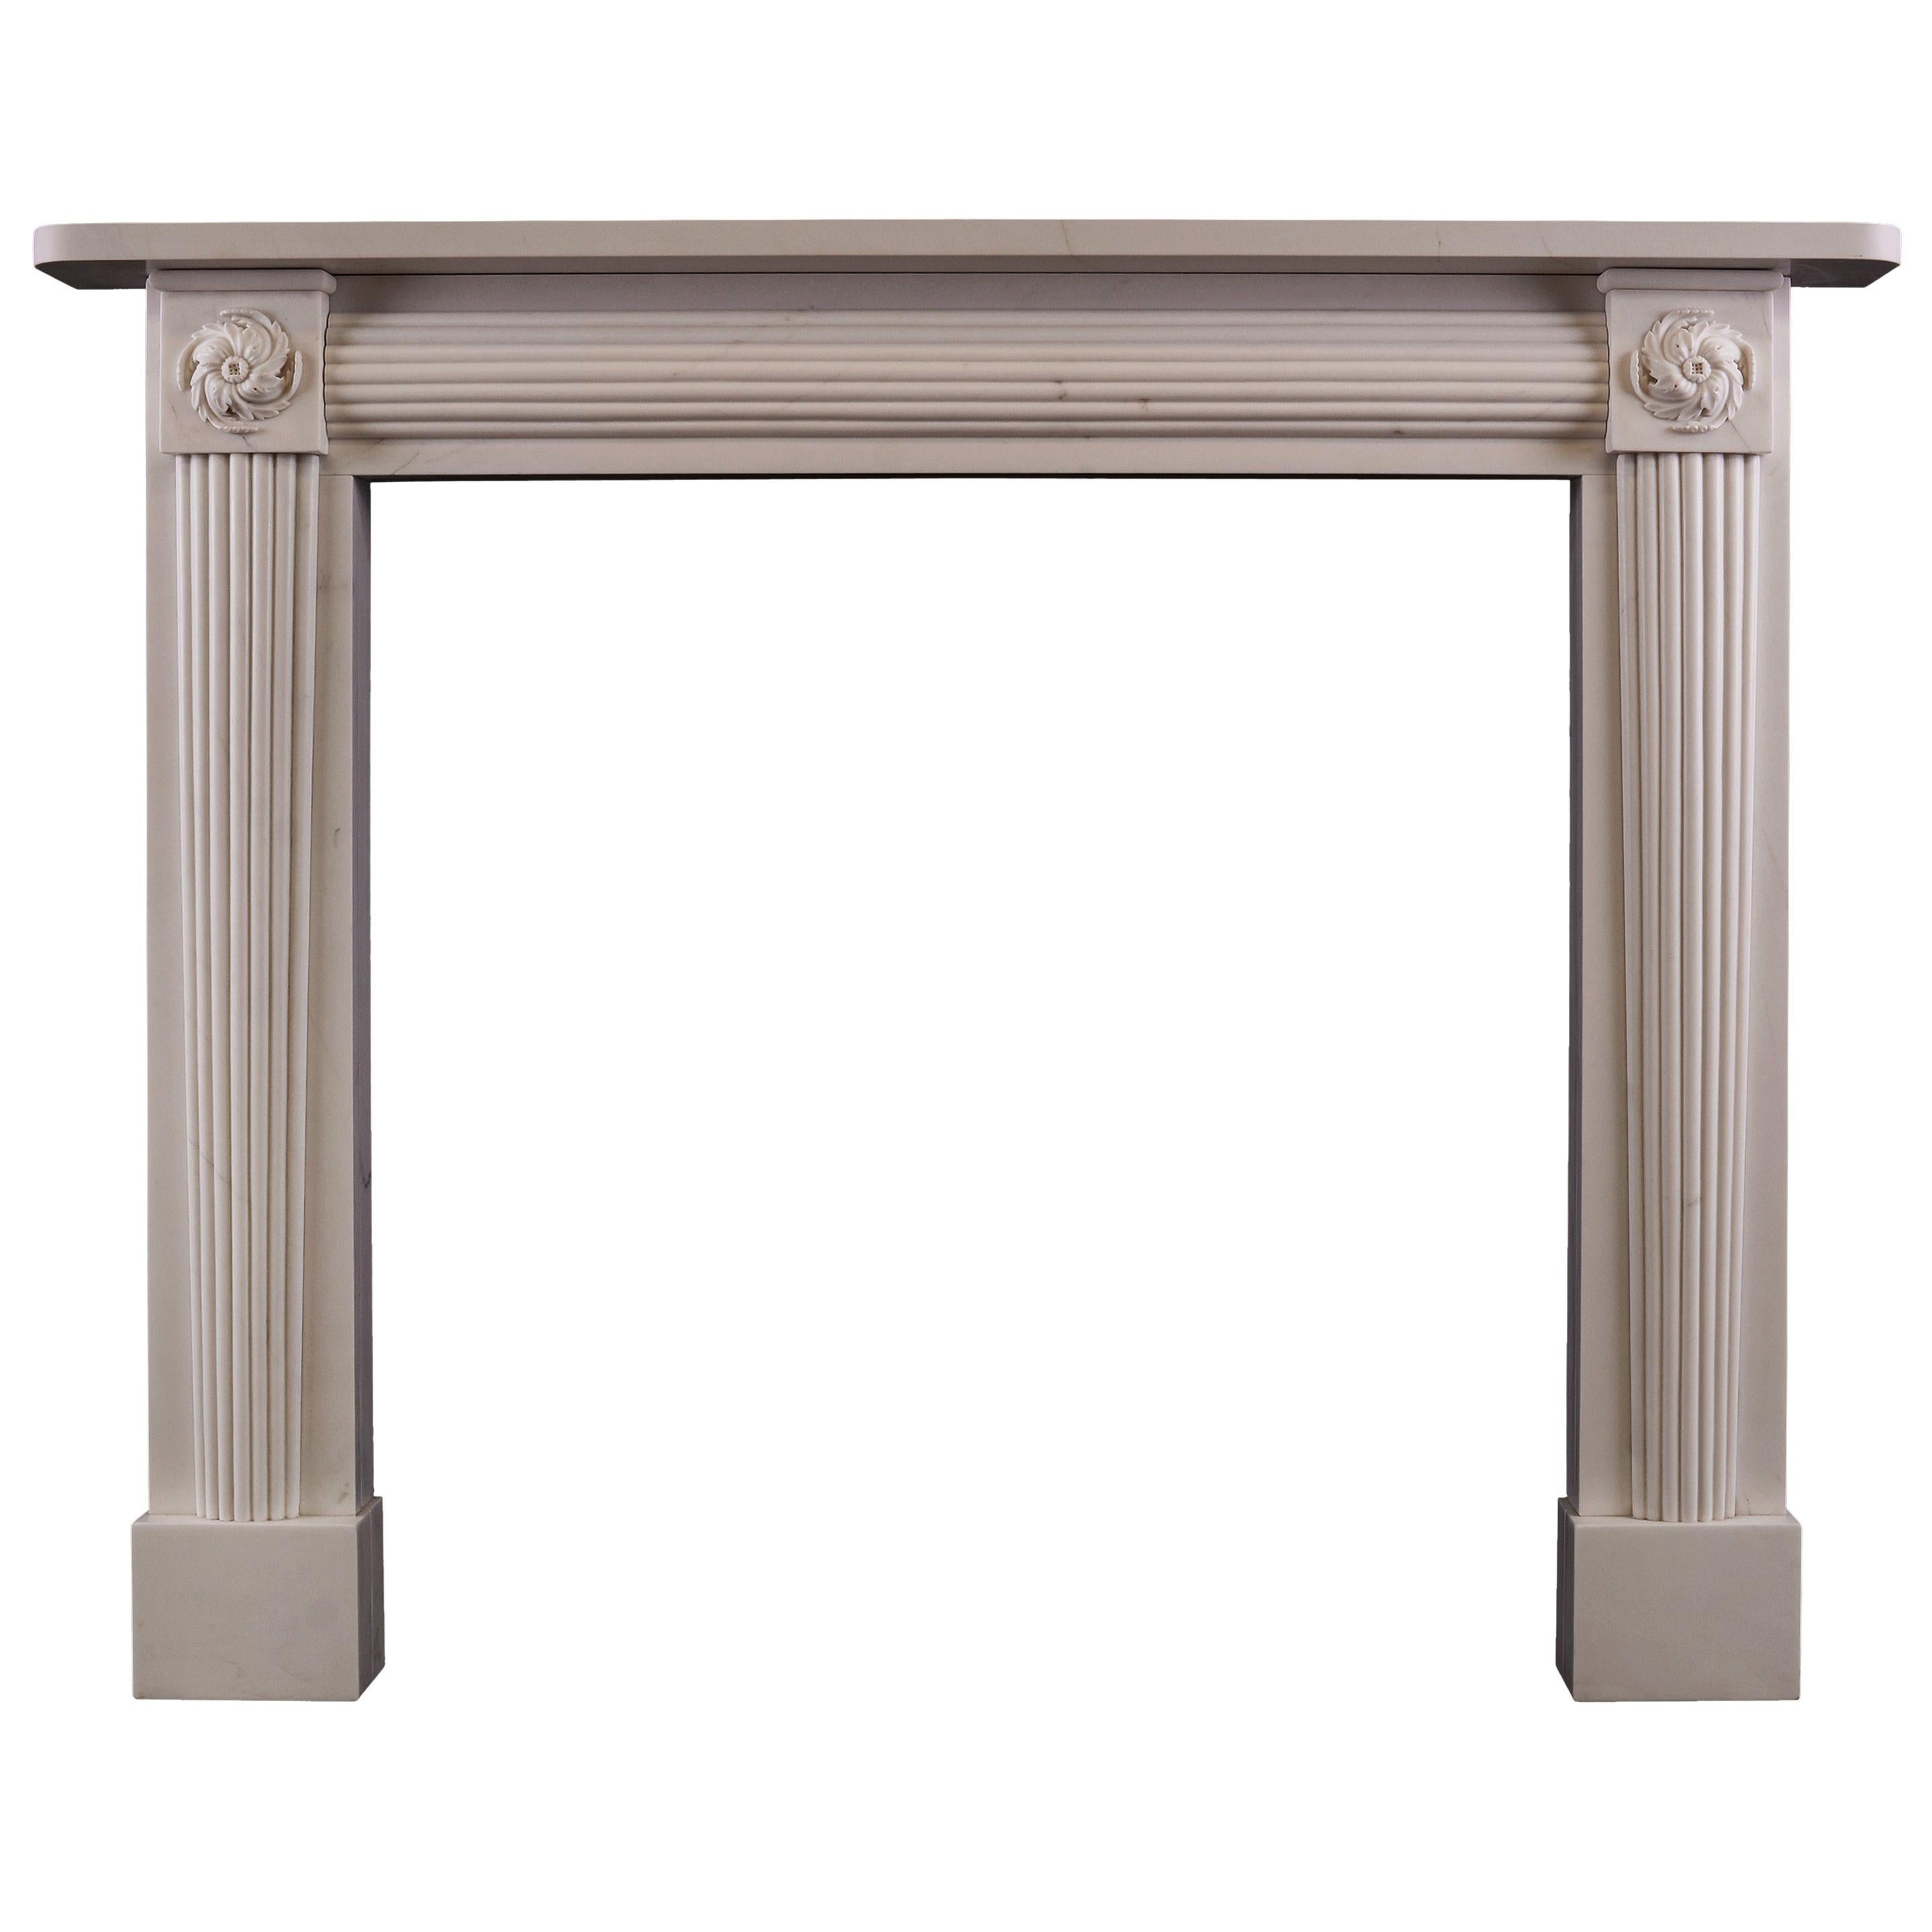 White Marble Fireplace in the Regency Manner